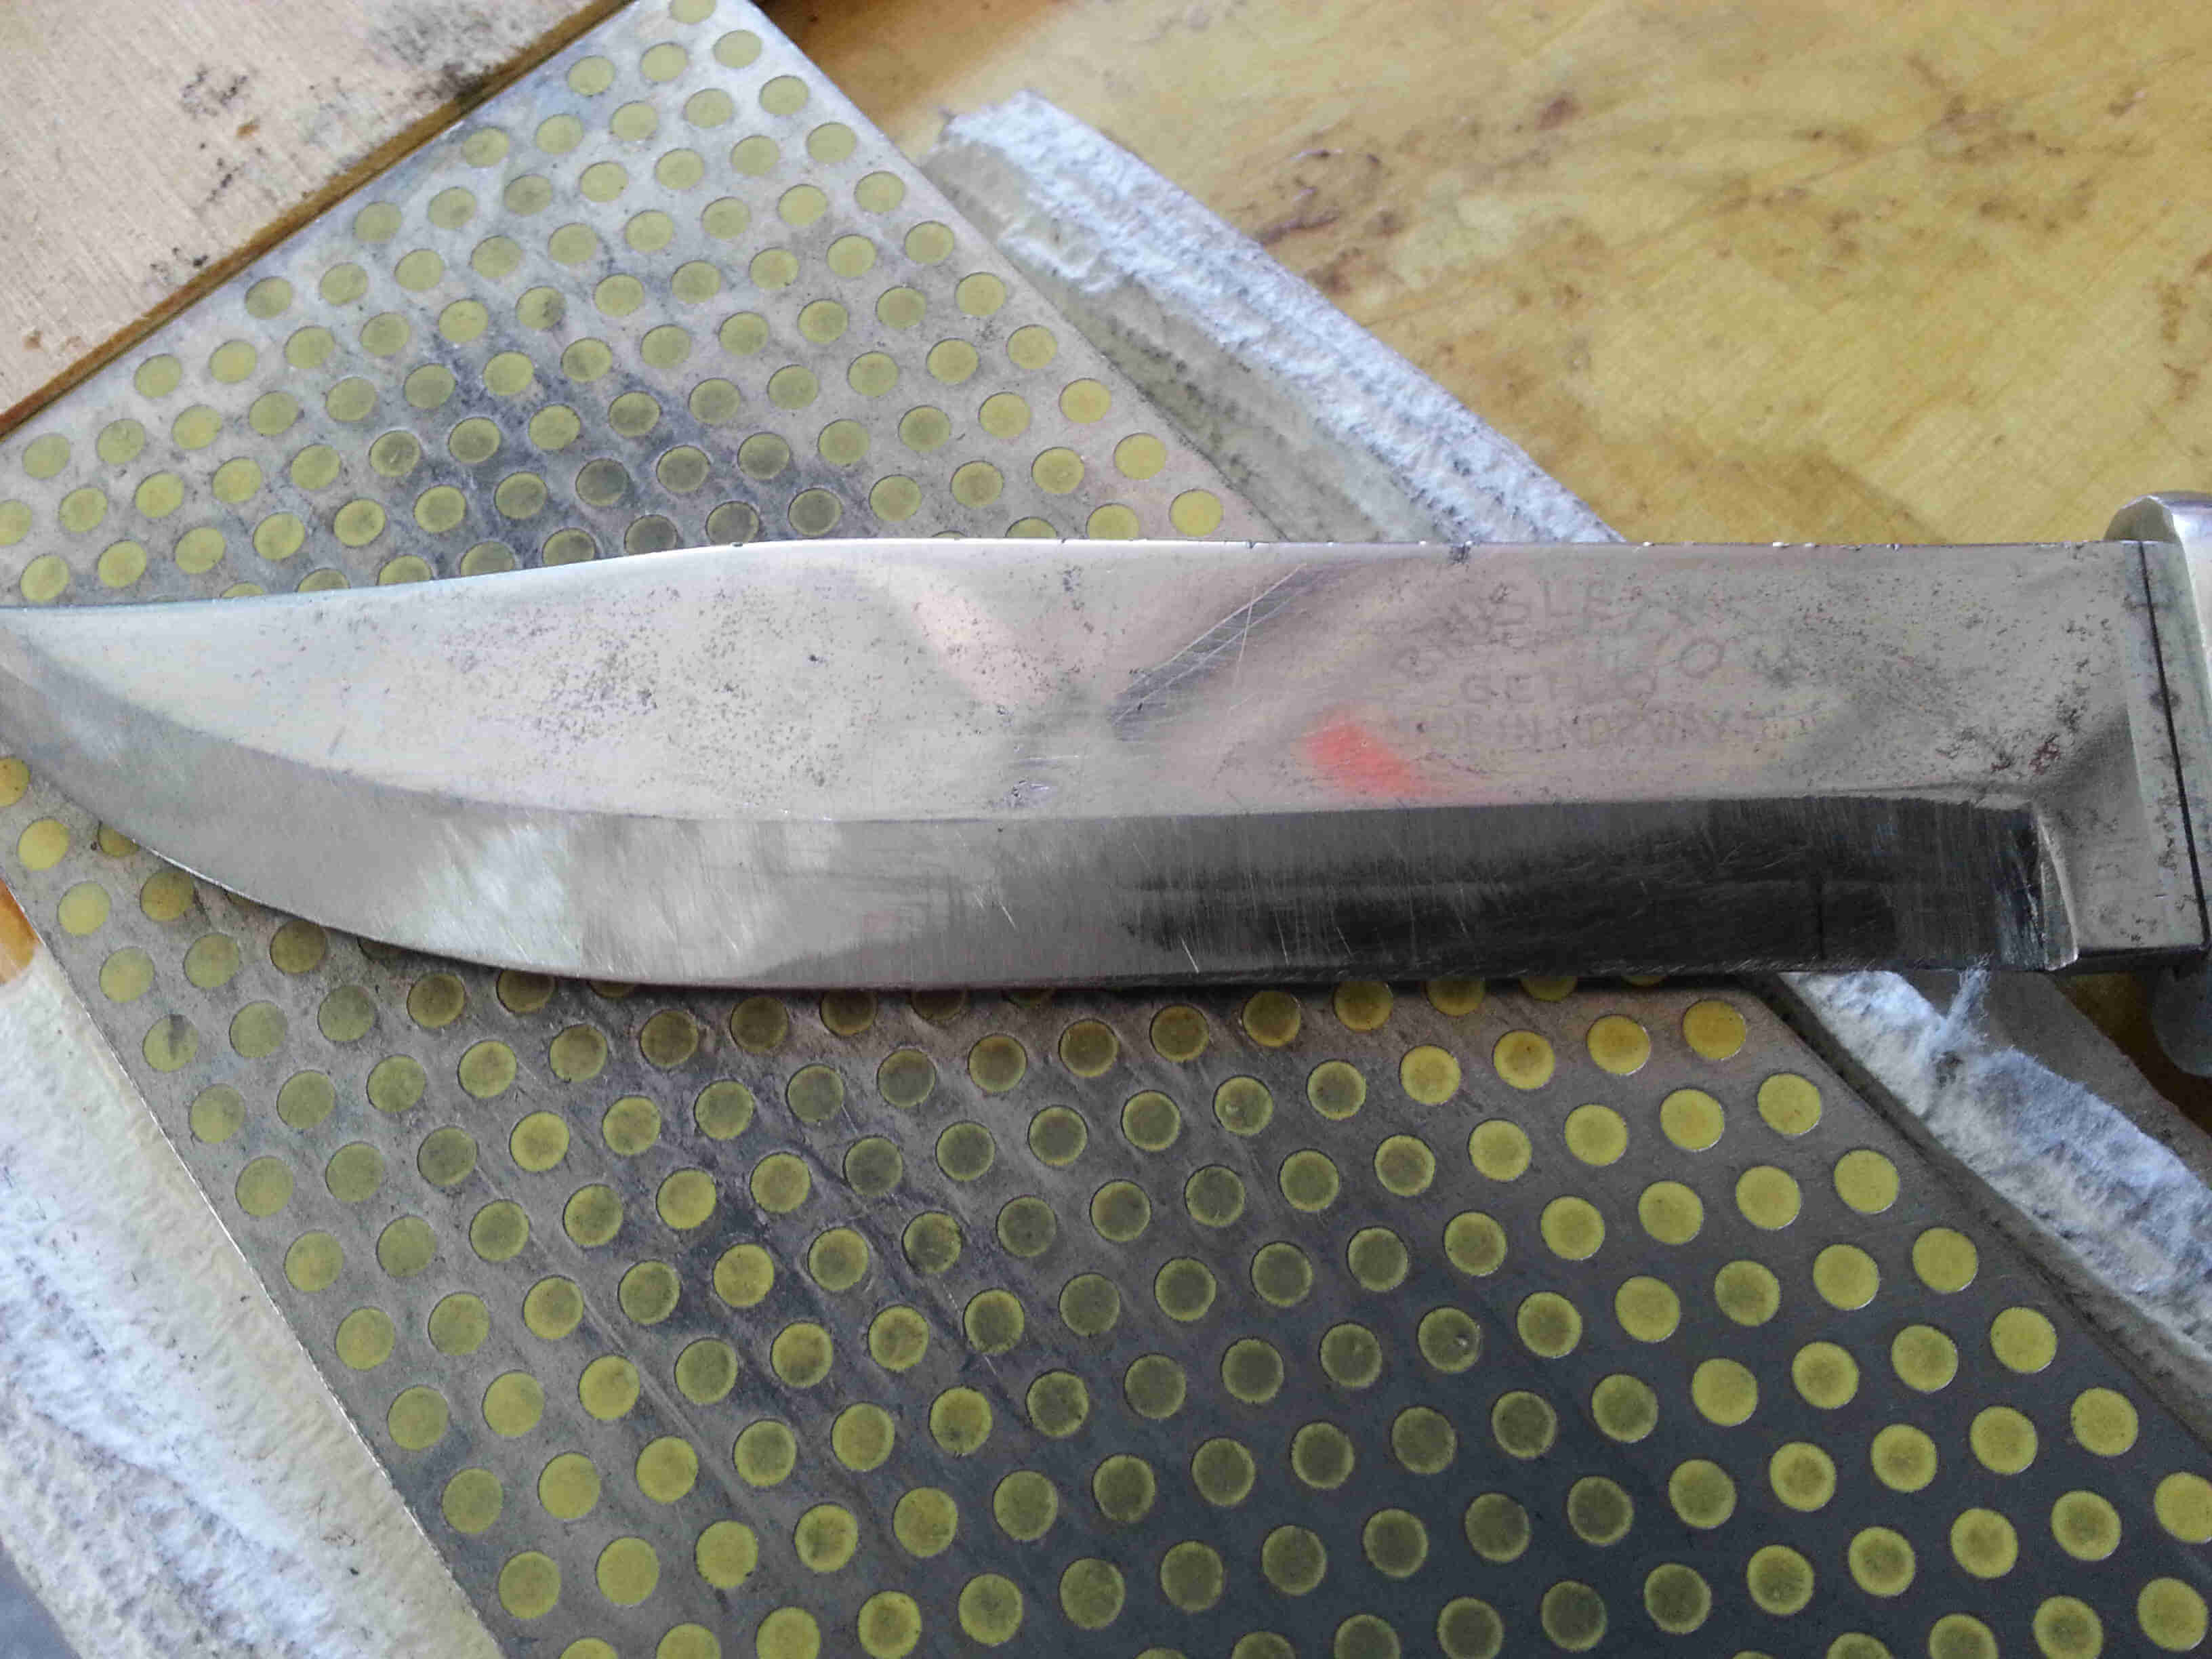 Downward view of a silver knife blade, laying across a sharpening stone